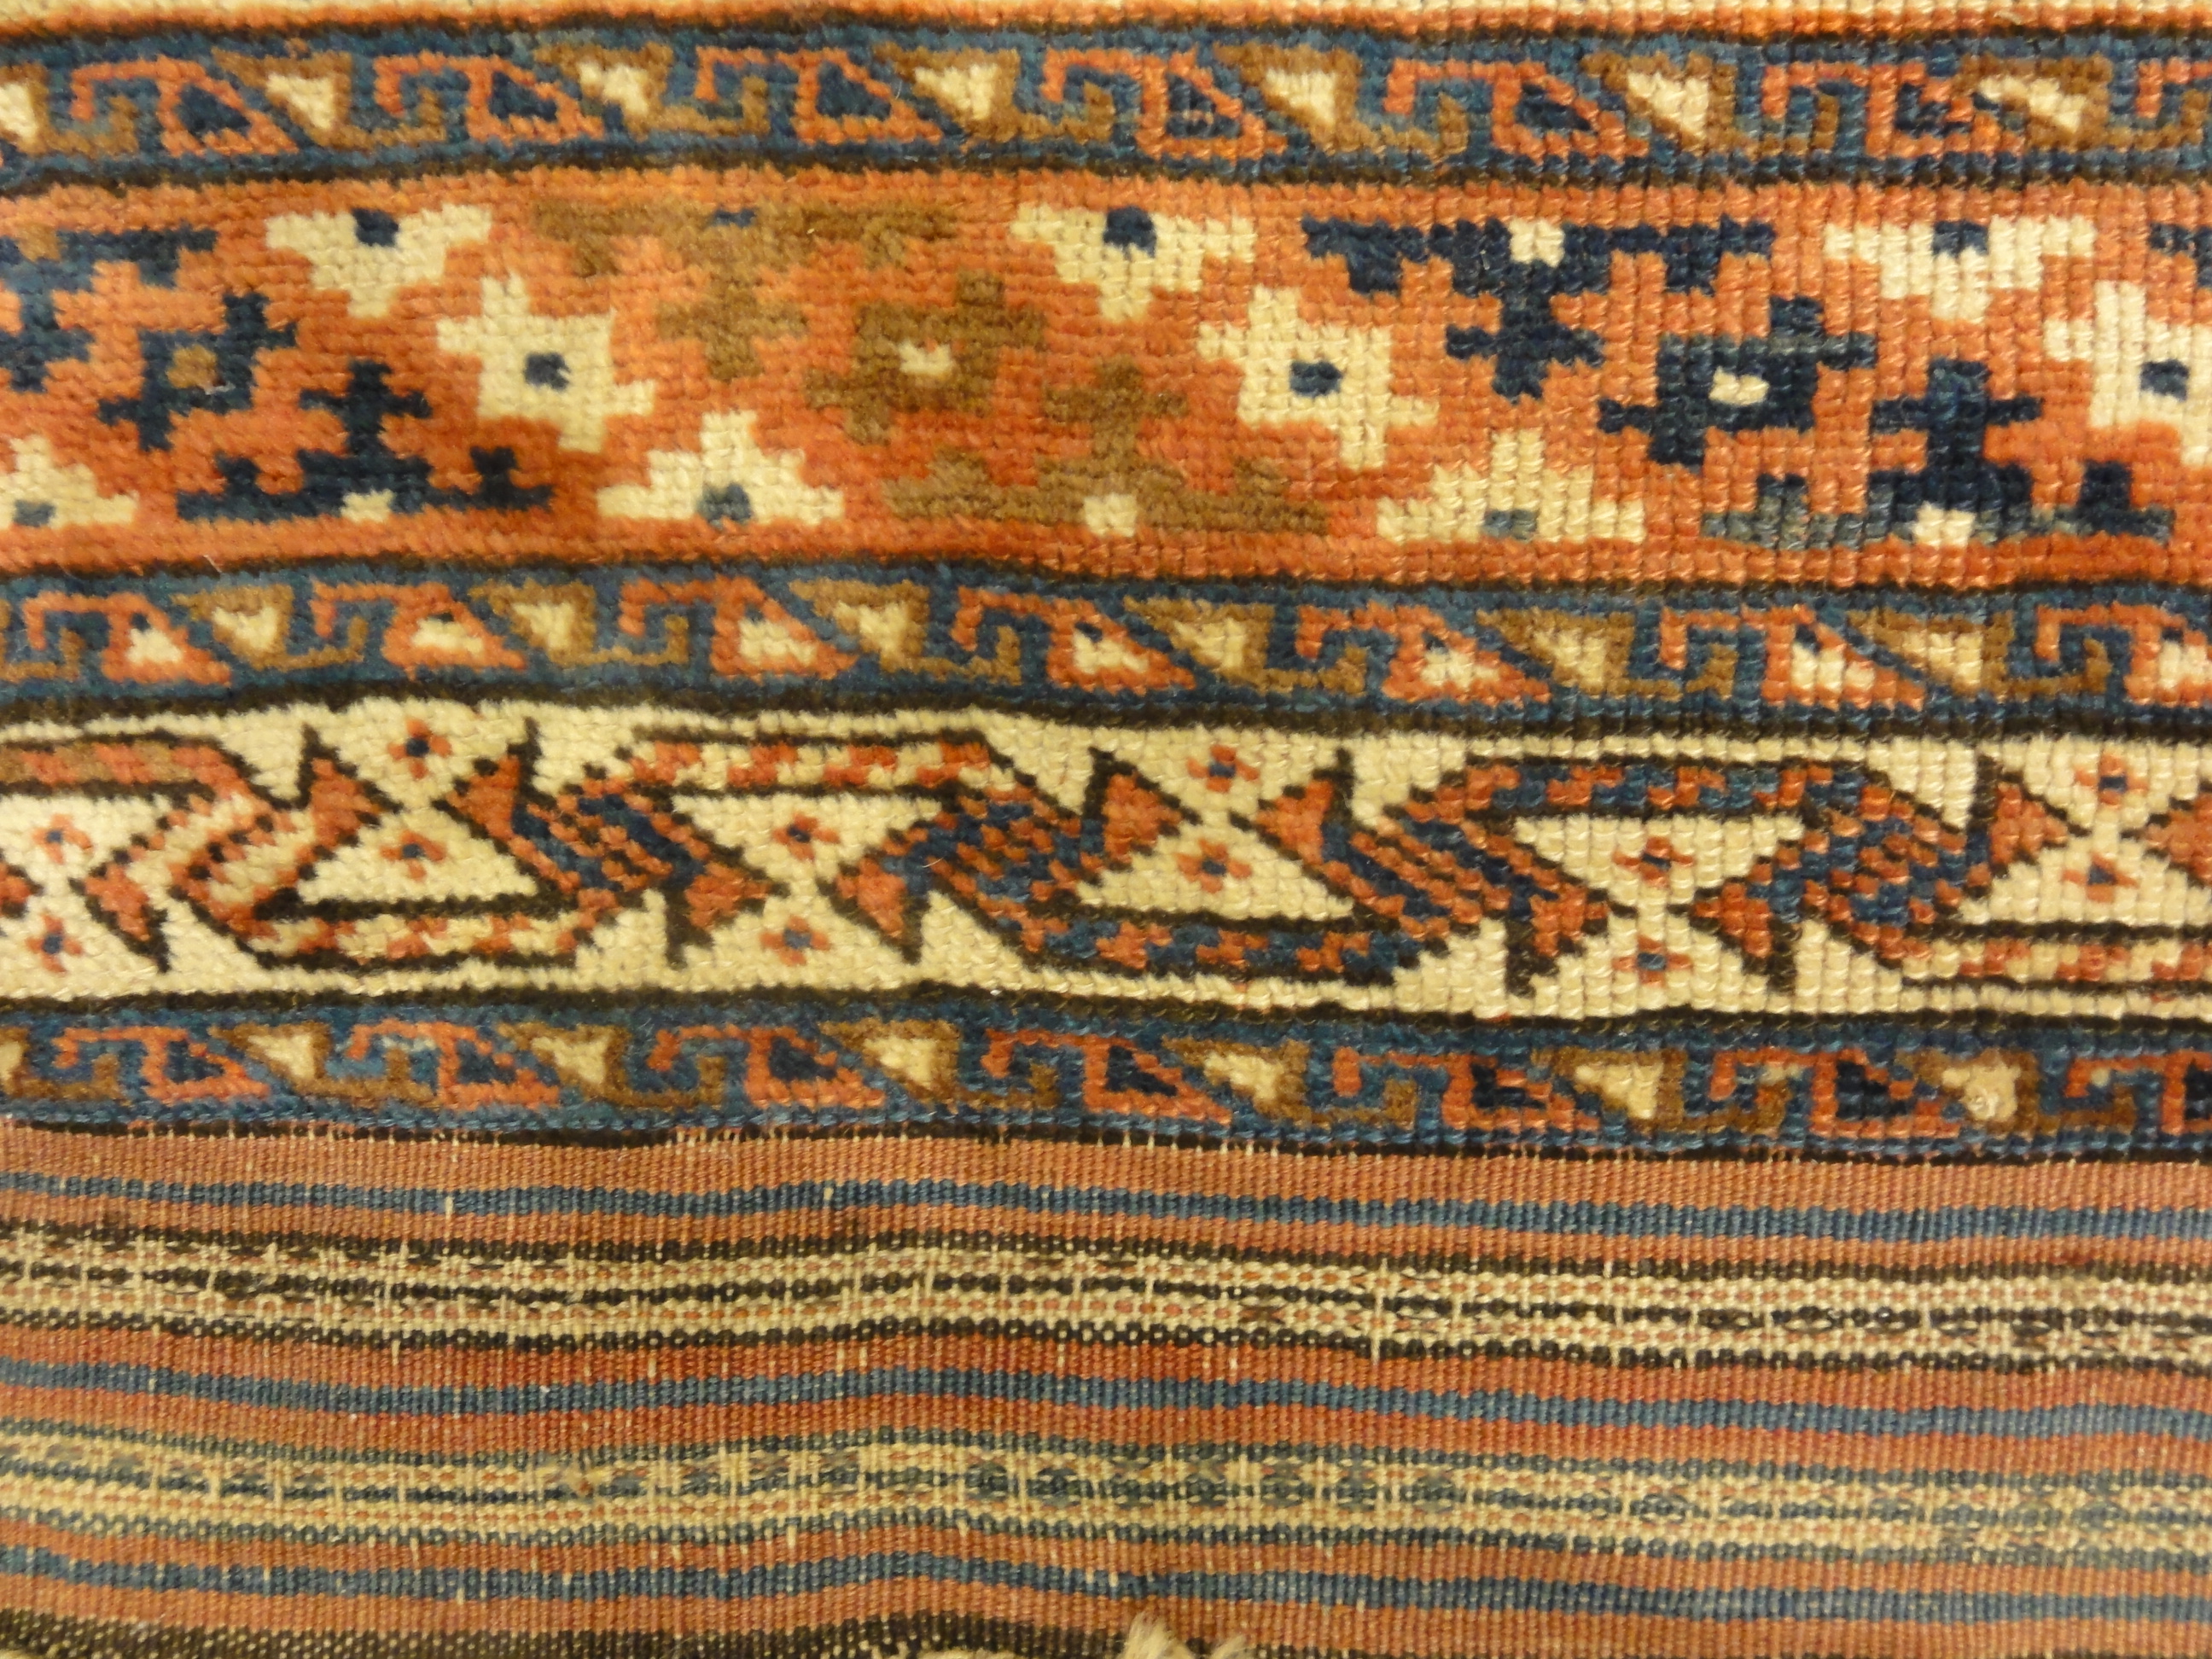 Antique Lori Persian Tribal Rug Circa 1880. A piece of genuine authentic antique woven carpet art sold by Santa Barbara Design Center Rugs and More.